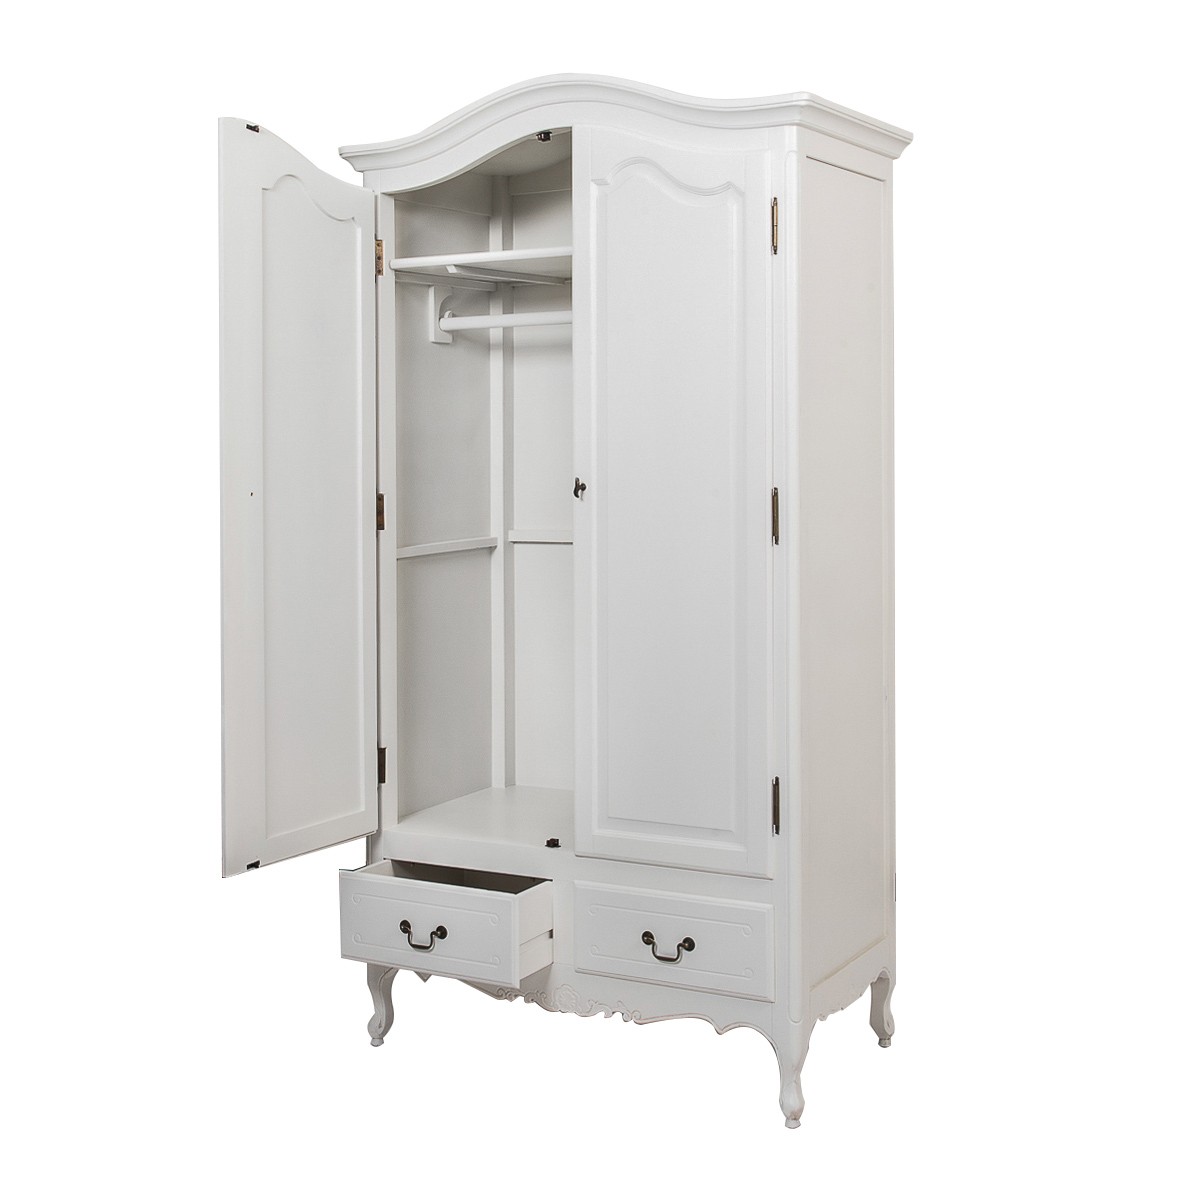 French Provincial Furniture Wardrobe With Drawers In White